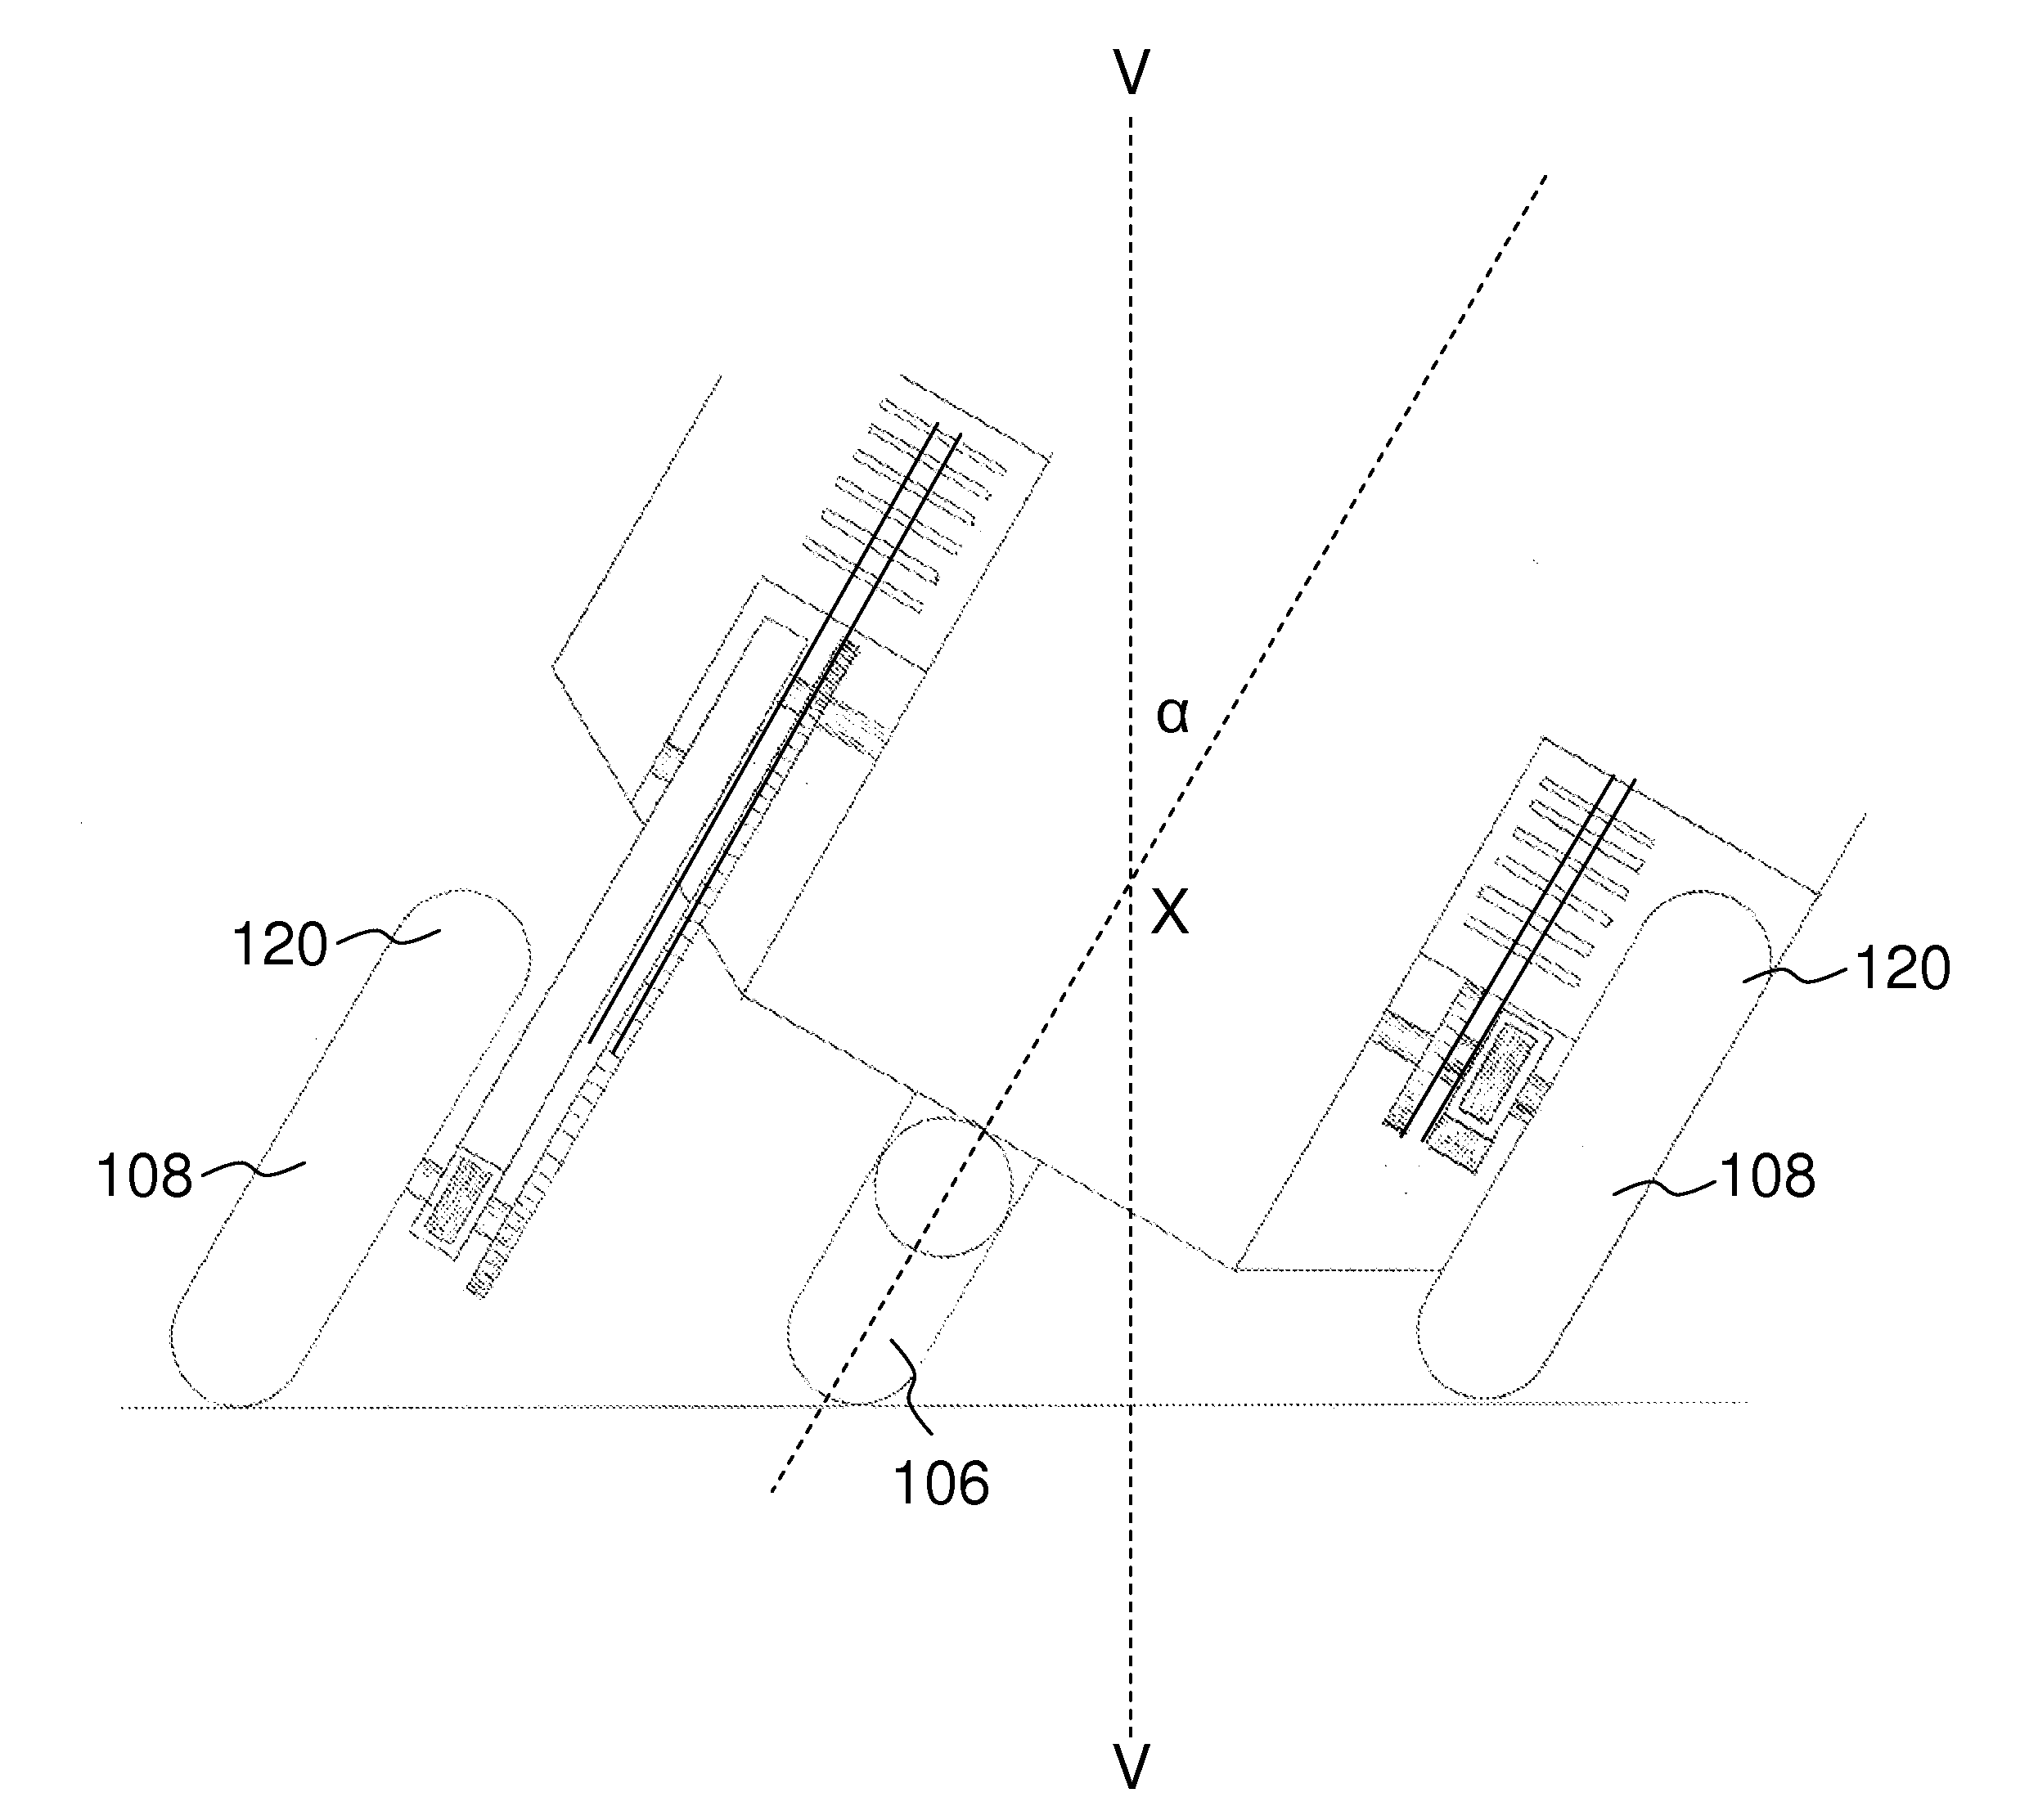 System and method for vehicle chassis control